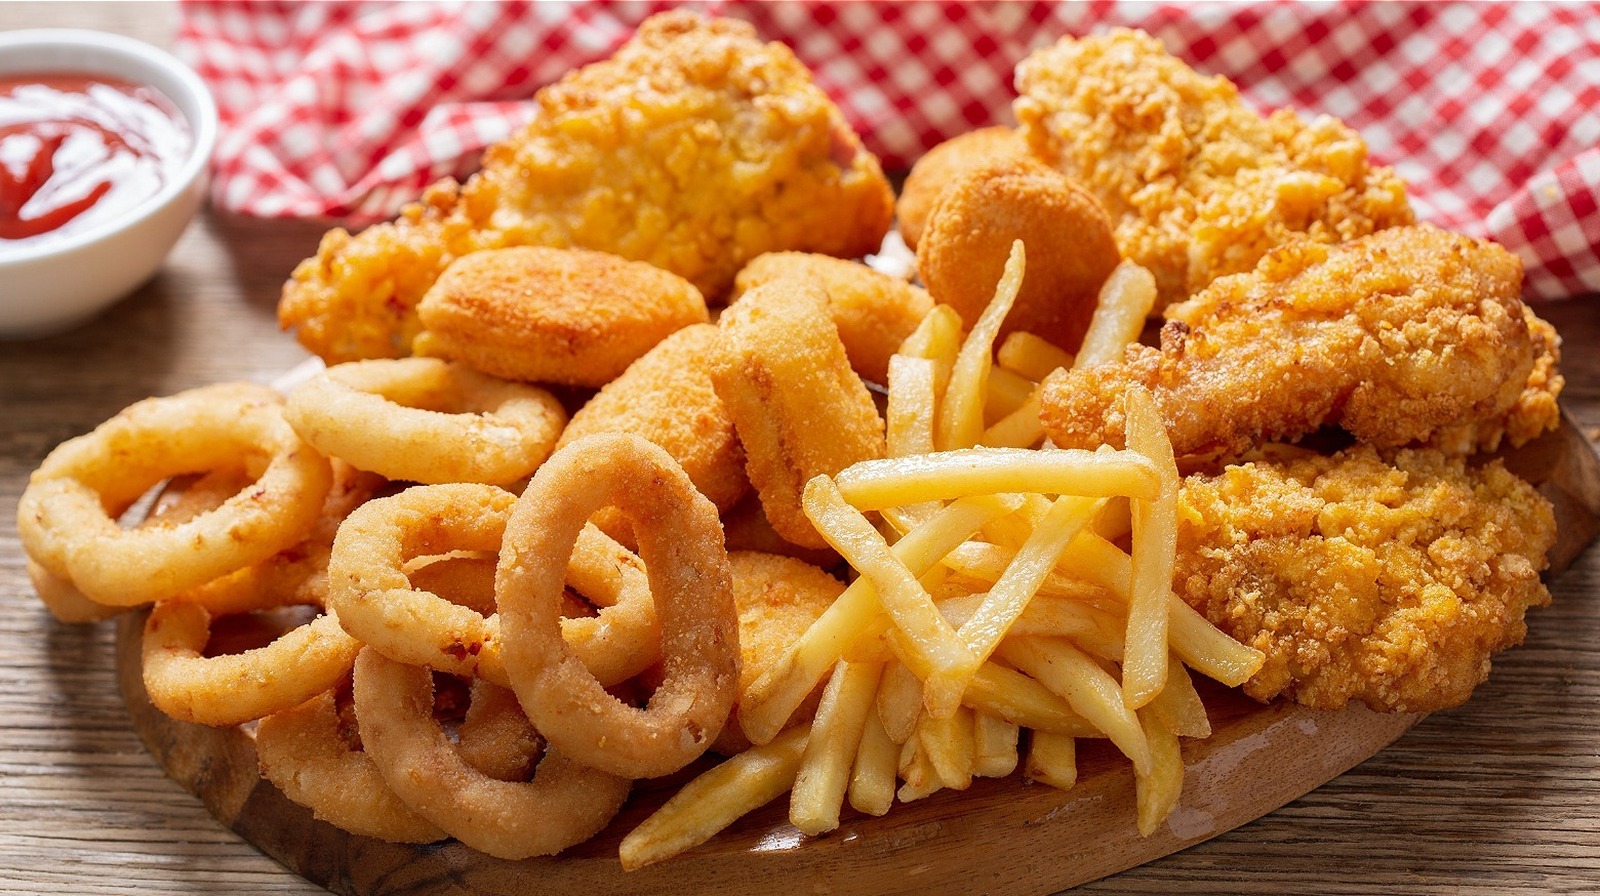 The Real Reason Fried Foods Are So Popular Right Now